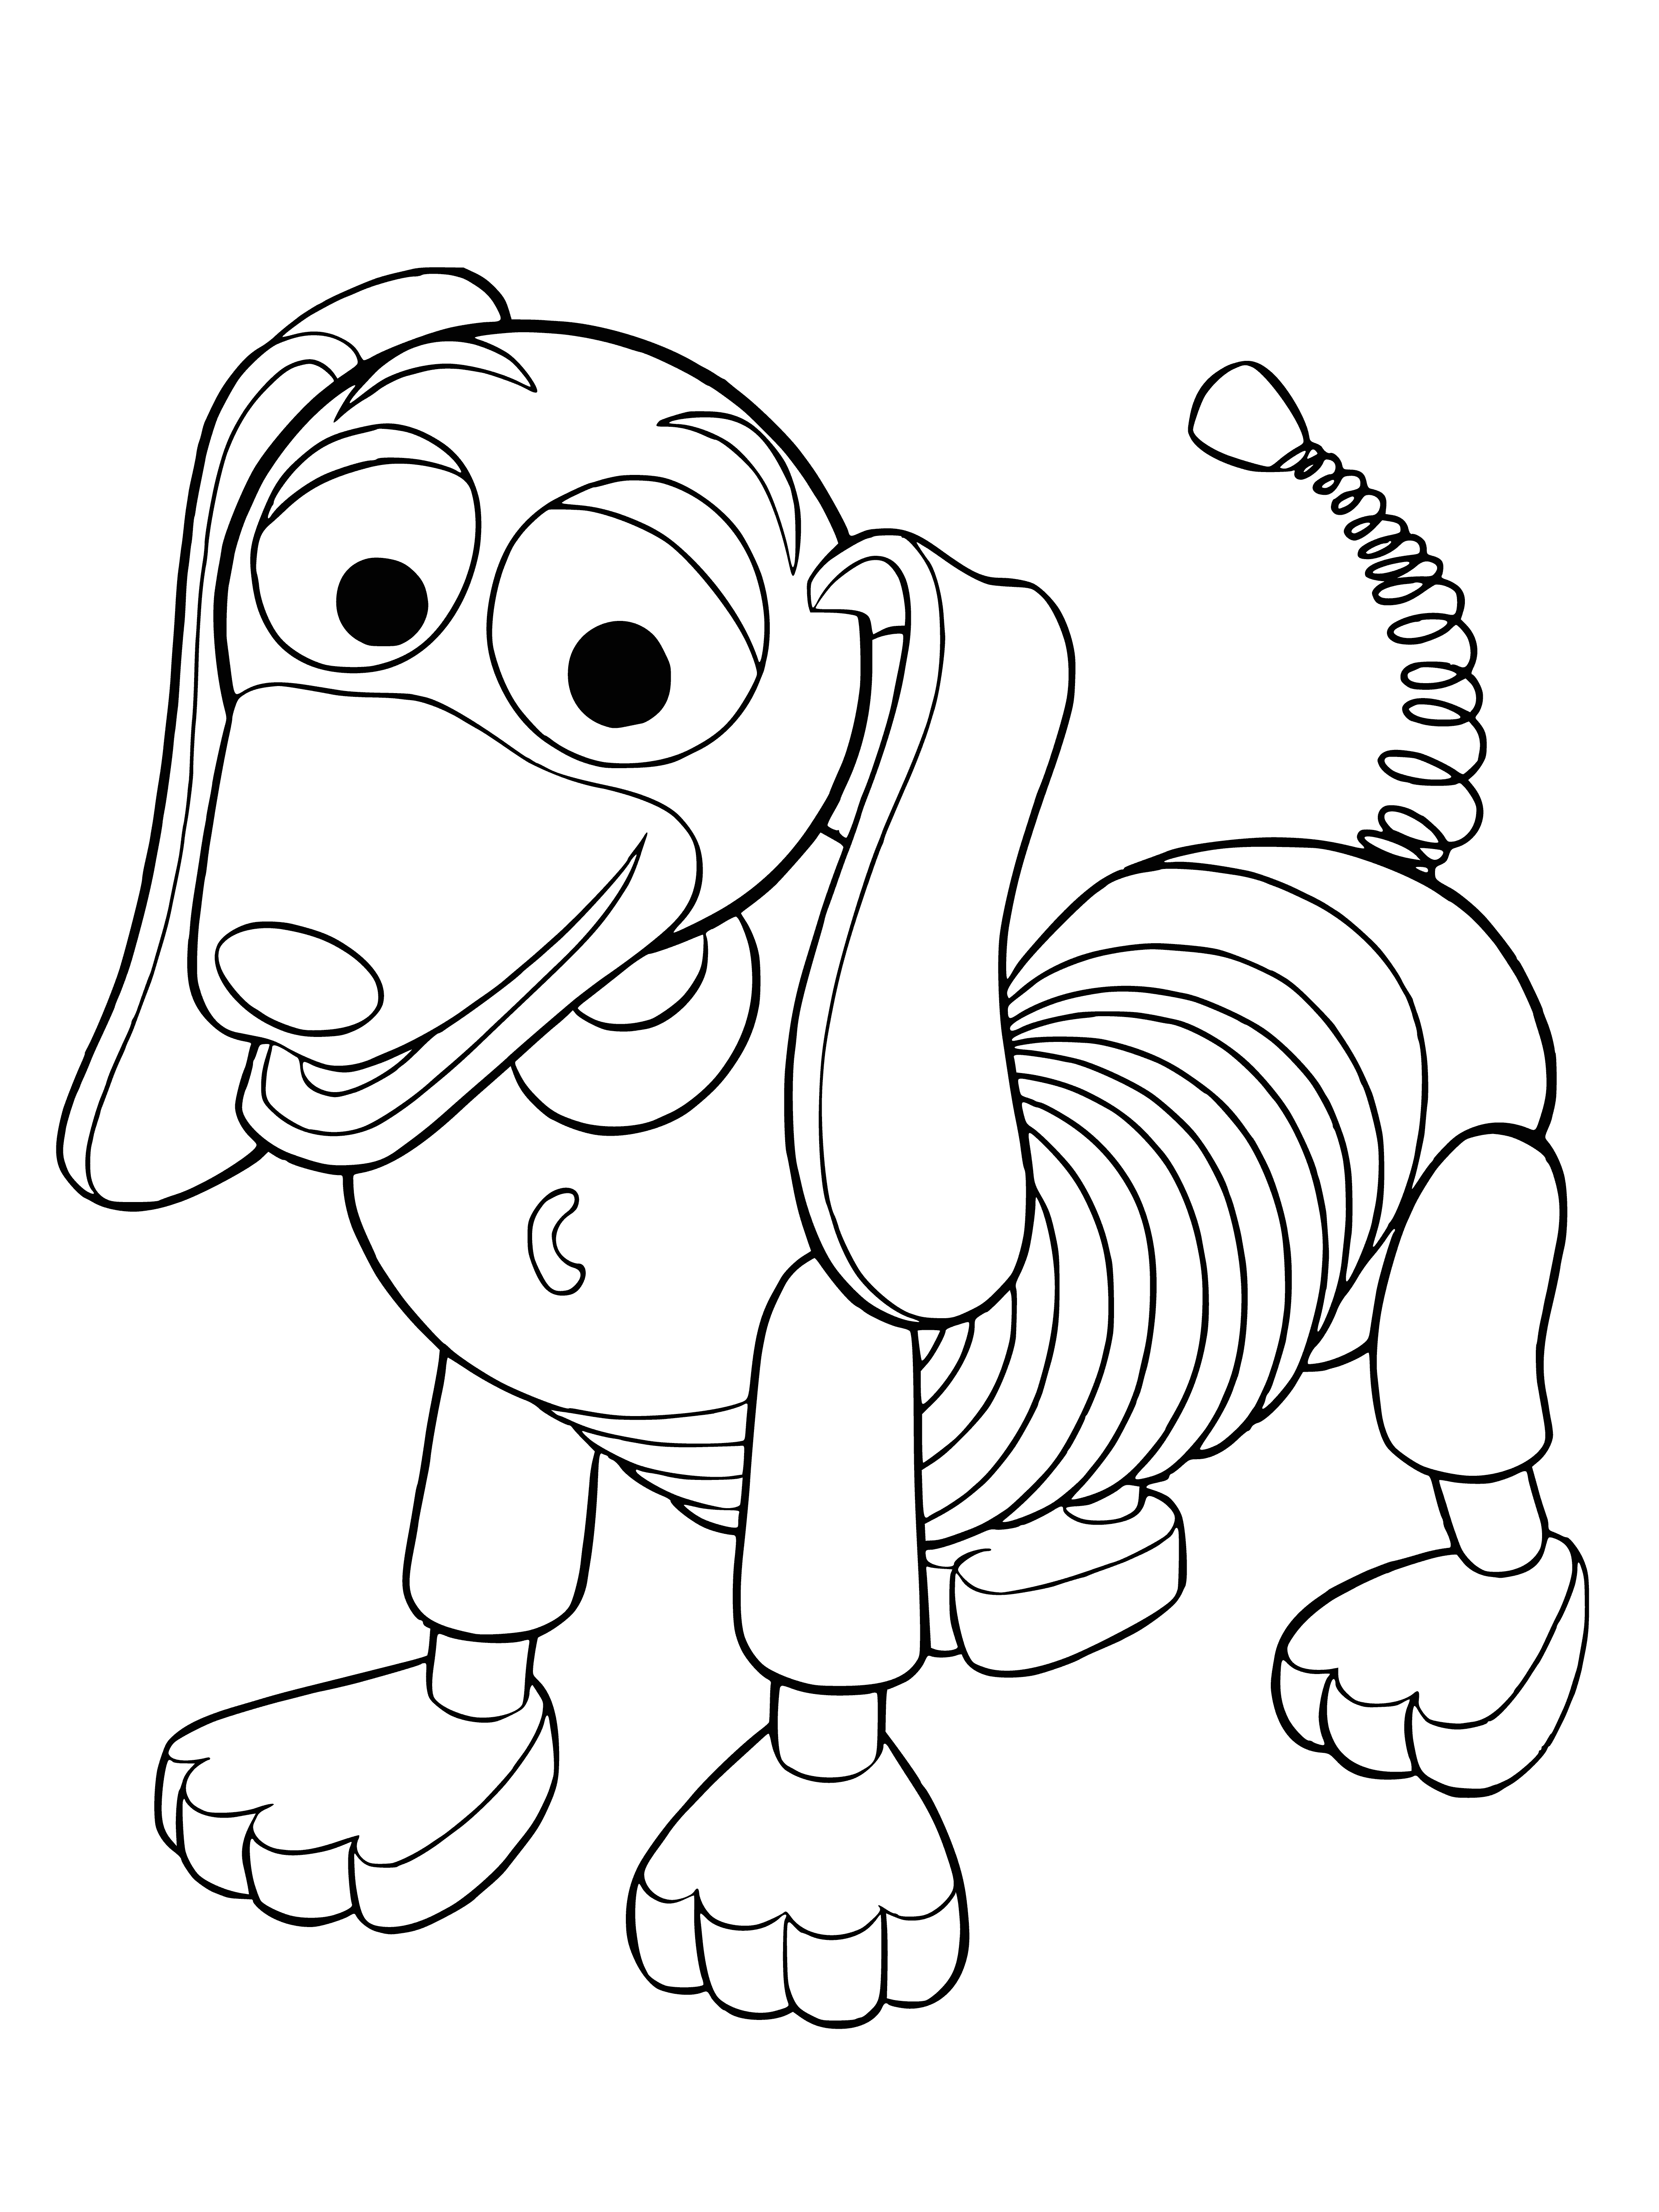 coloring page: Small, white and orange dog with perky ears, big eyes, black nose, and toothy grin coiled in a spiral.